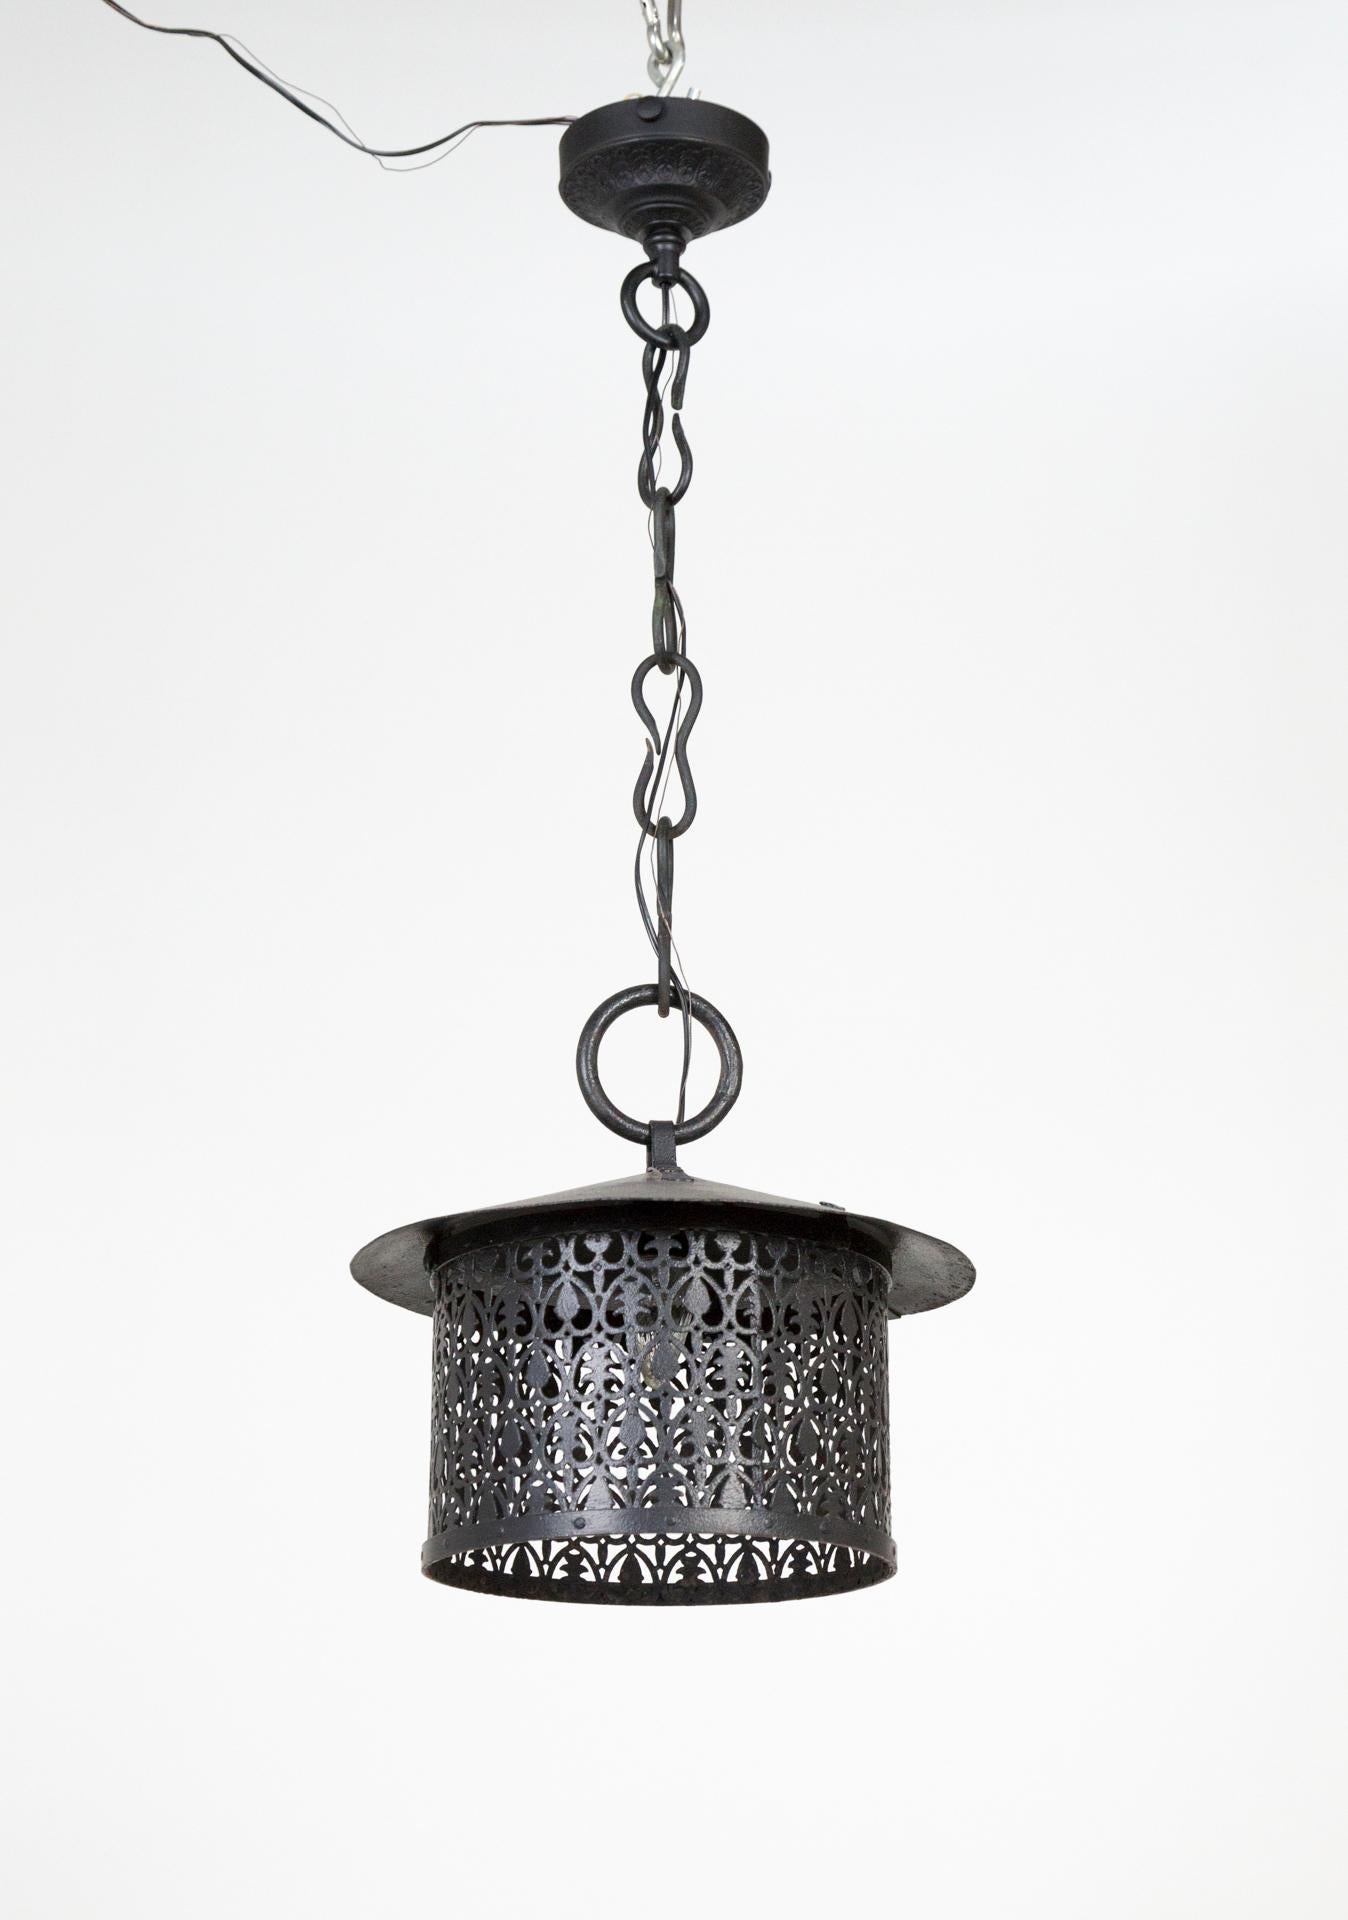 An Arts & Crafts, cylindrical, wrought iron lantern with decorative cut shapes, stylized acorn and tree details; painted black. Asian influenced in its simplicity. A large loop accent on a unique, hand forged chain with a decorative canopy.